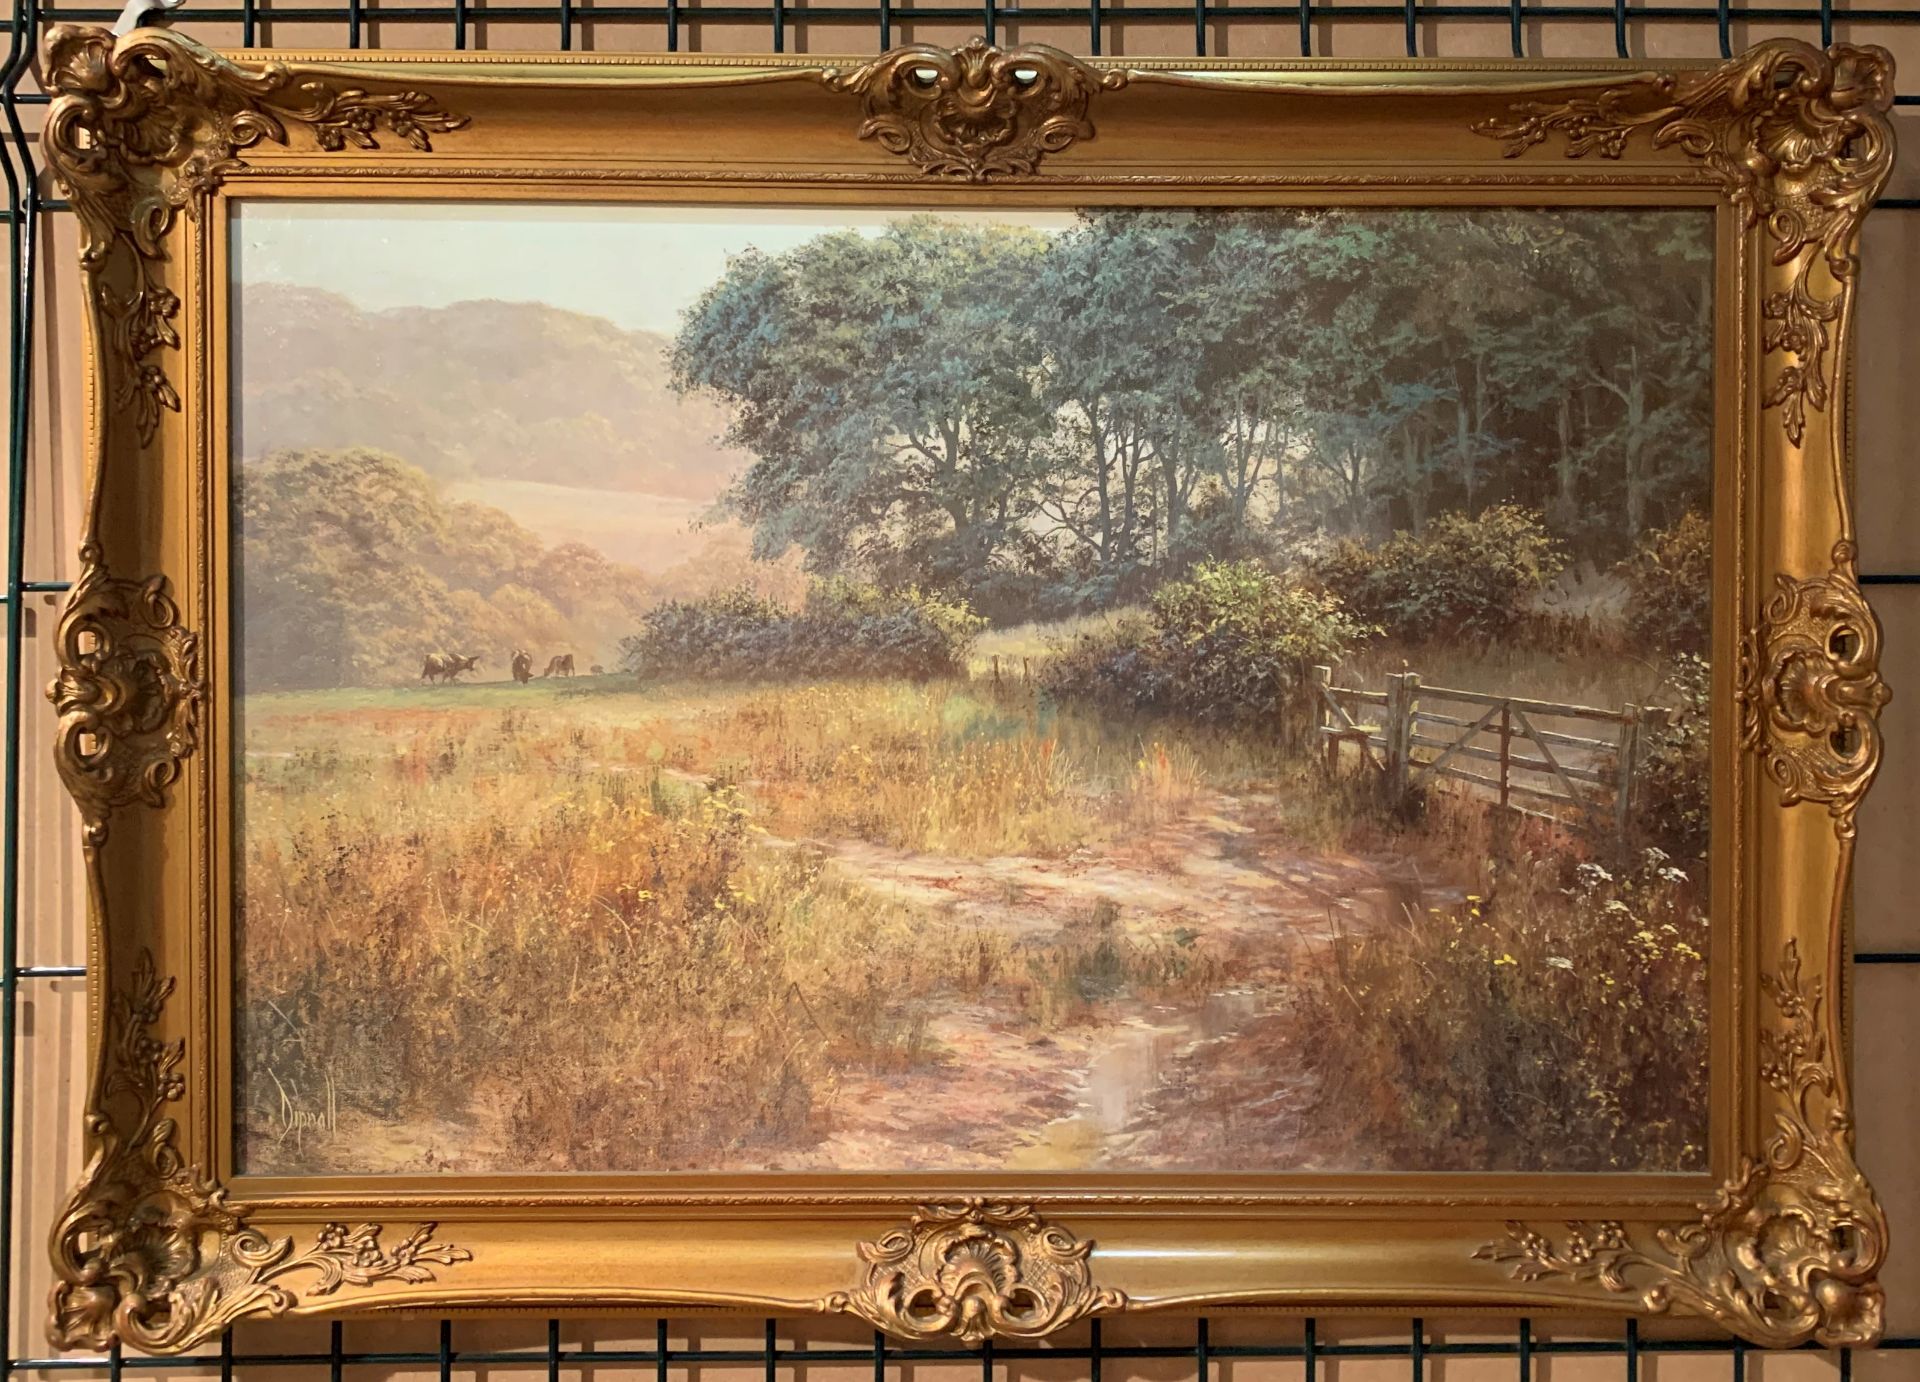 *** LOT WITHDRAWN *** Dipnall gilt framed oil on canvas 'Cattle grazing in a field' 49 x 74cm